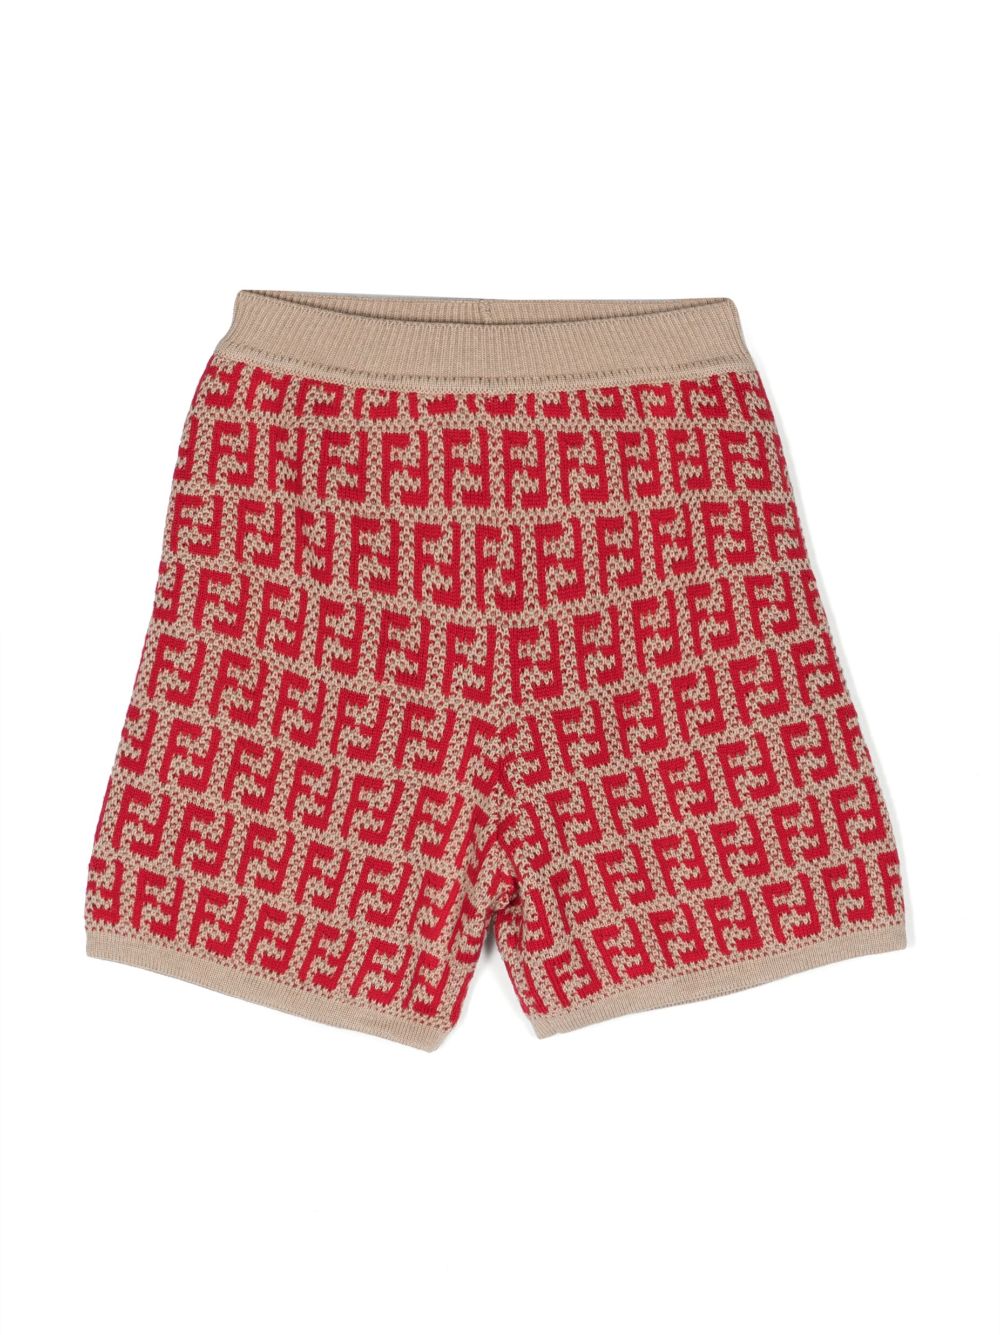 Red and beige shorts for girls